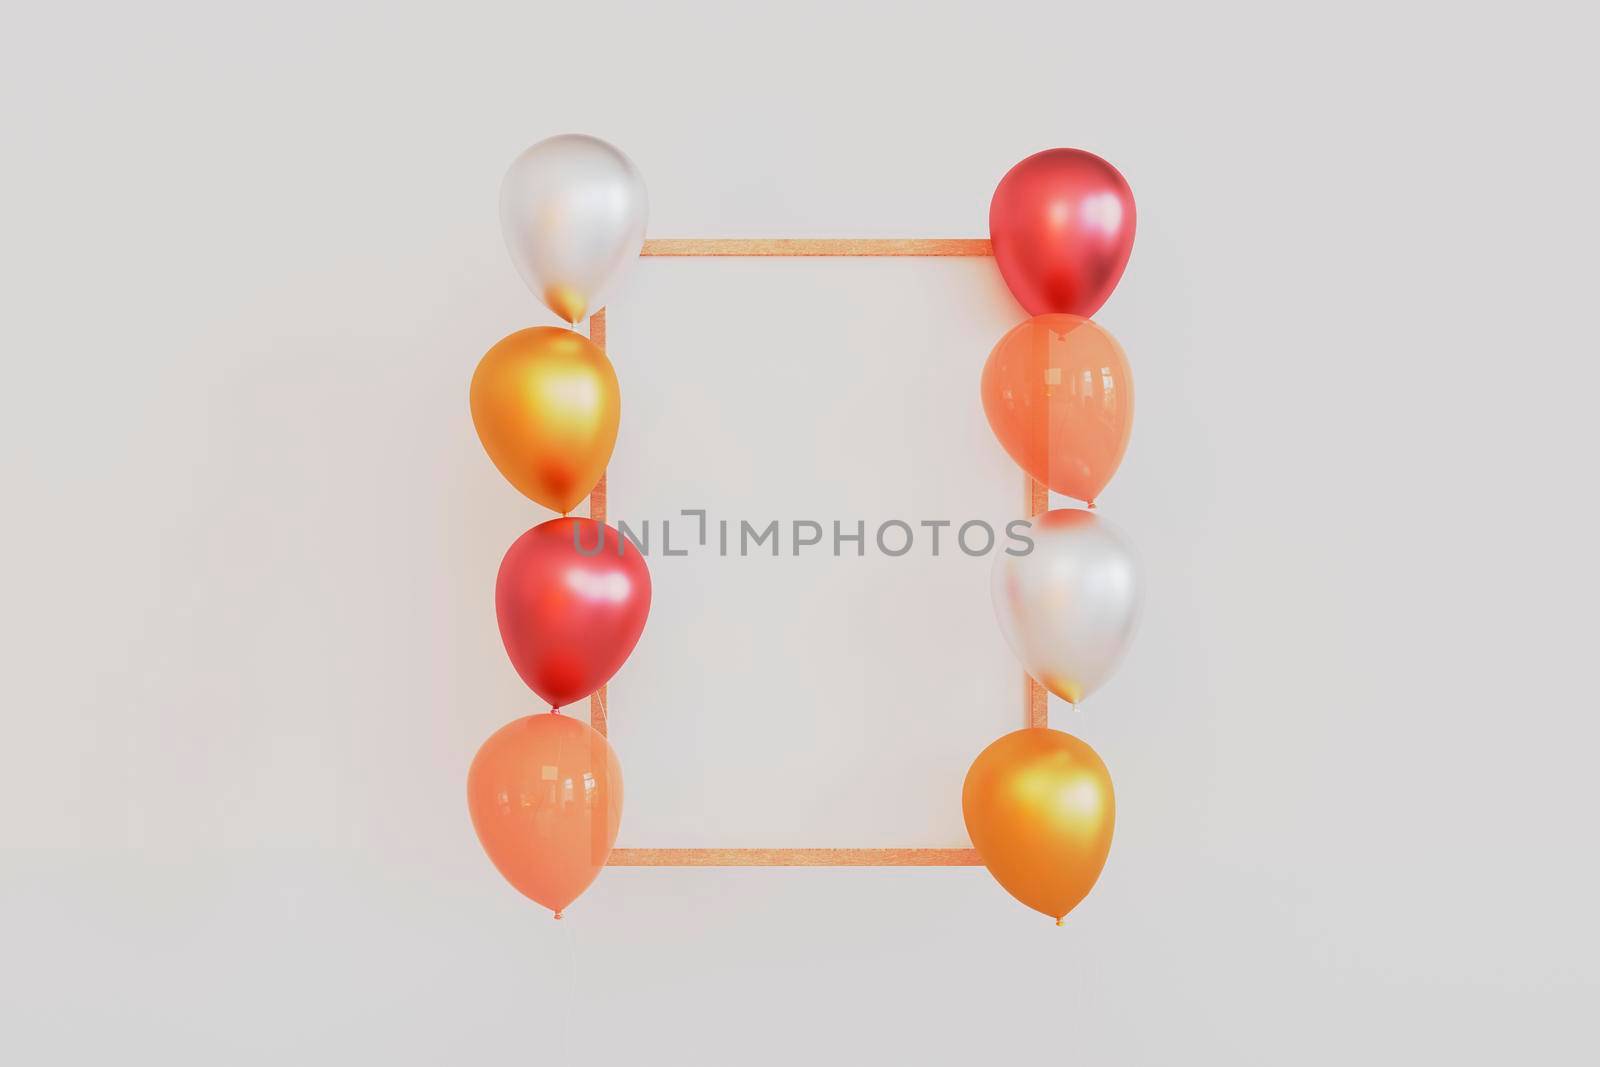 Poster mock up with pink, orange, silver and golden glossy 3d realistic balloons. 3d illustration by raferto1973